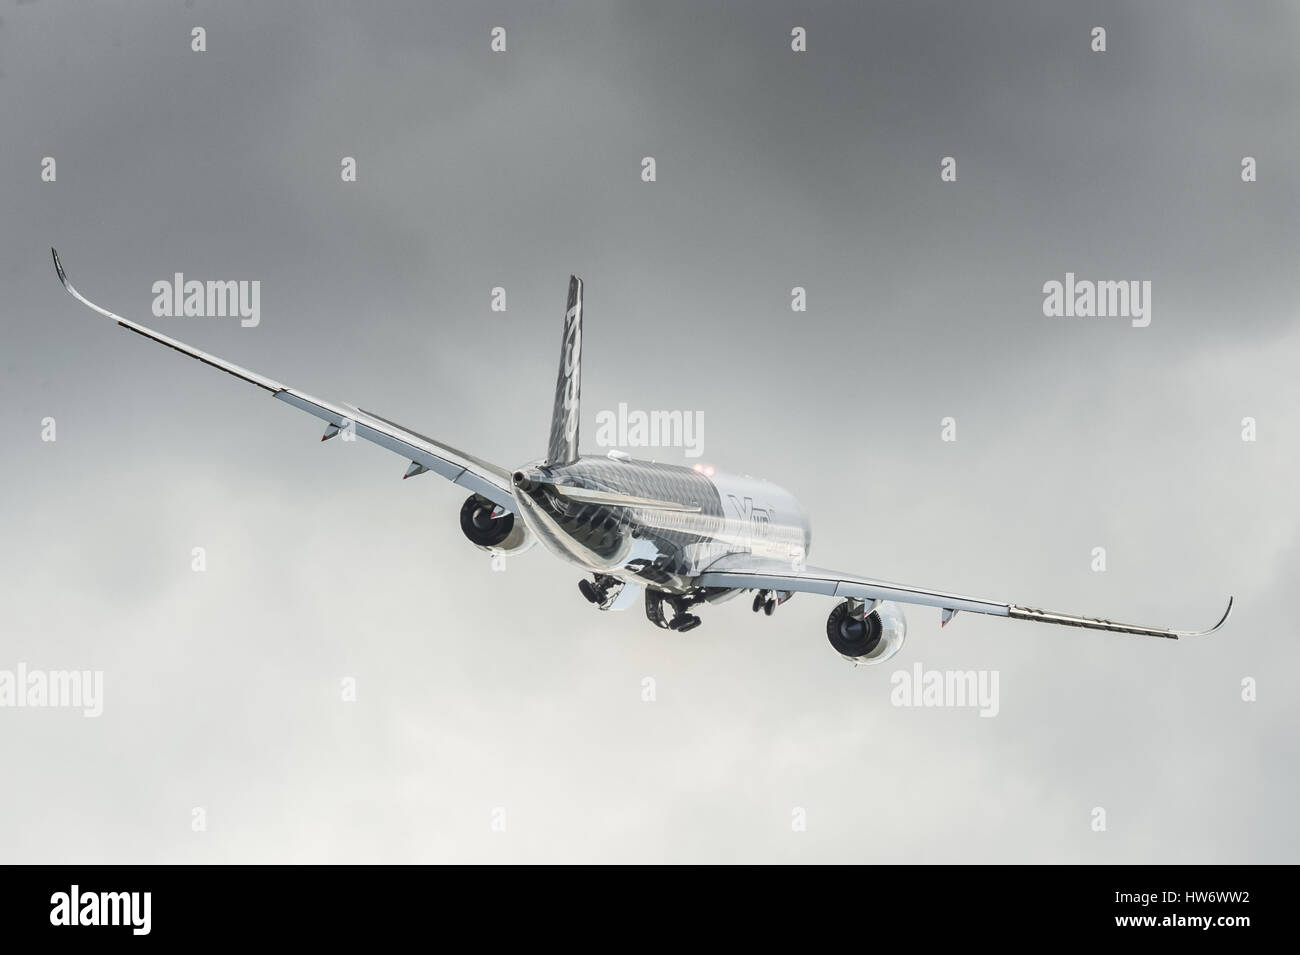 Airbus A350 XWB take-off from international aviation trade event at Farnborough, UK Stock Photo